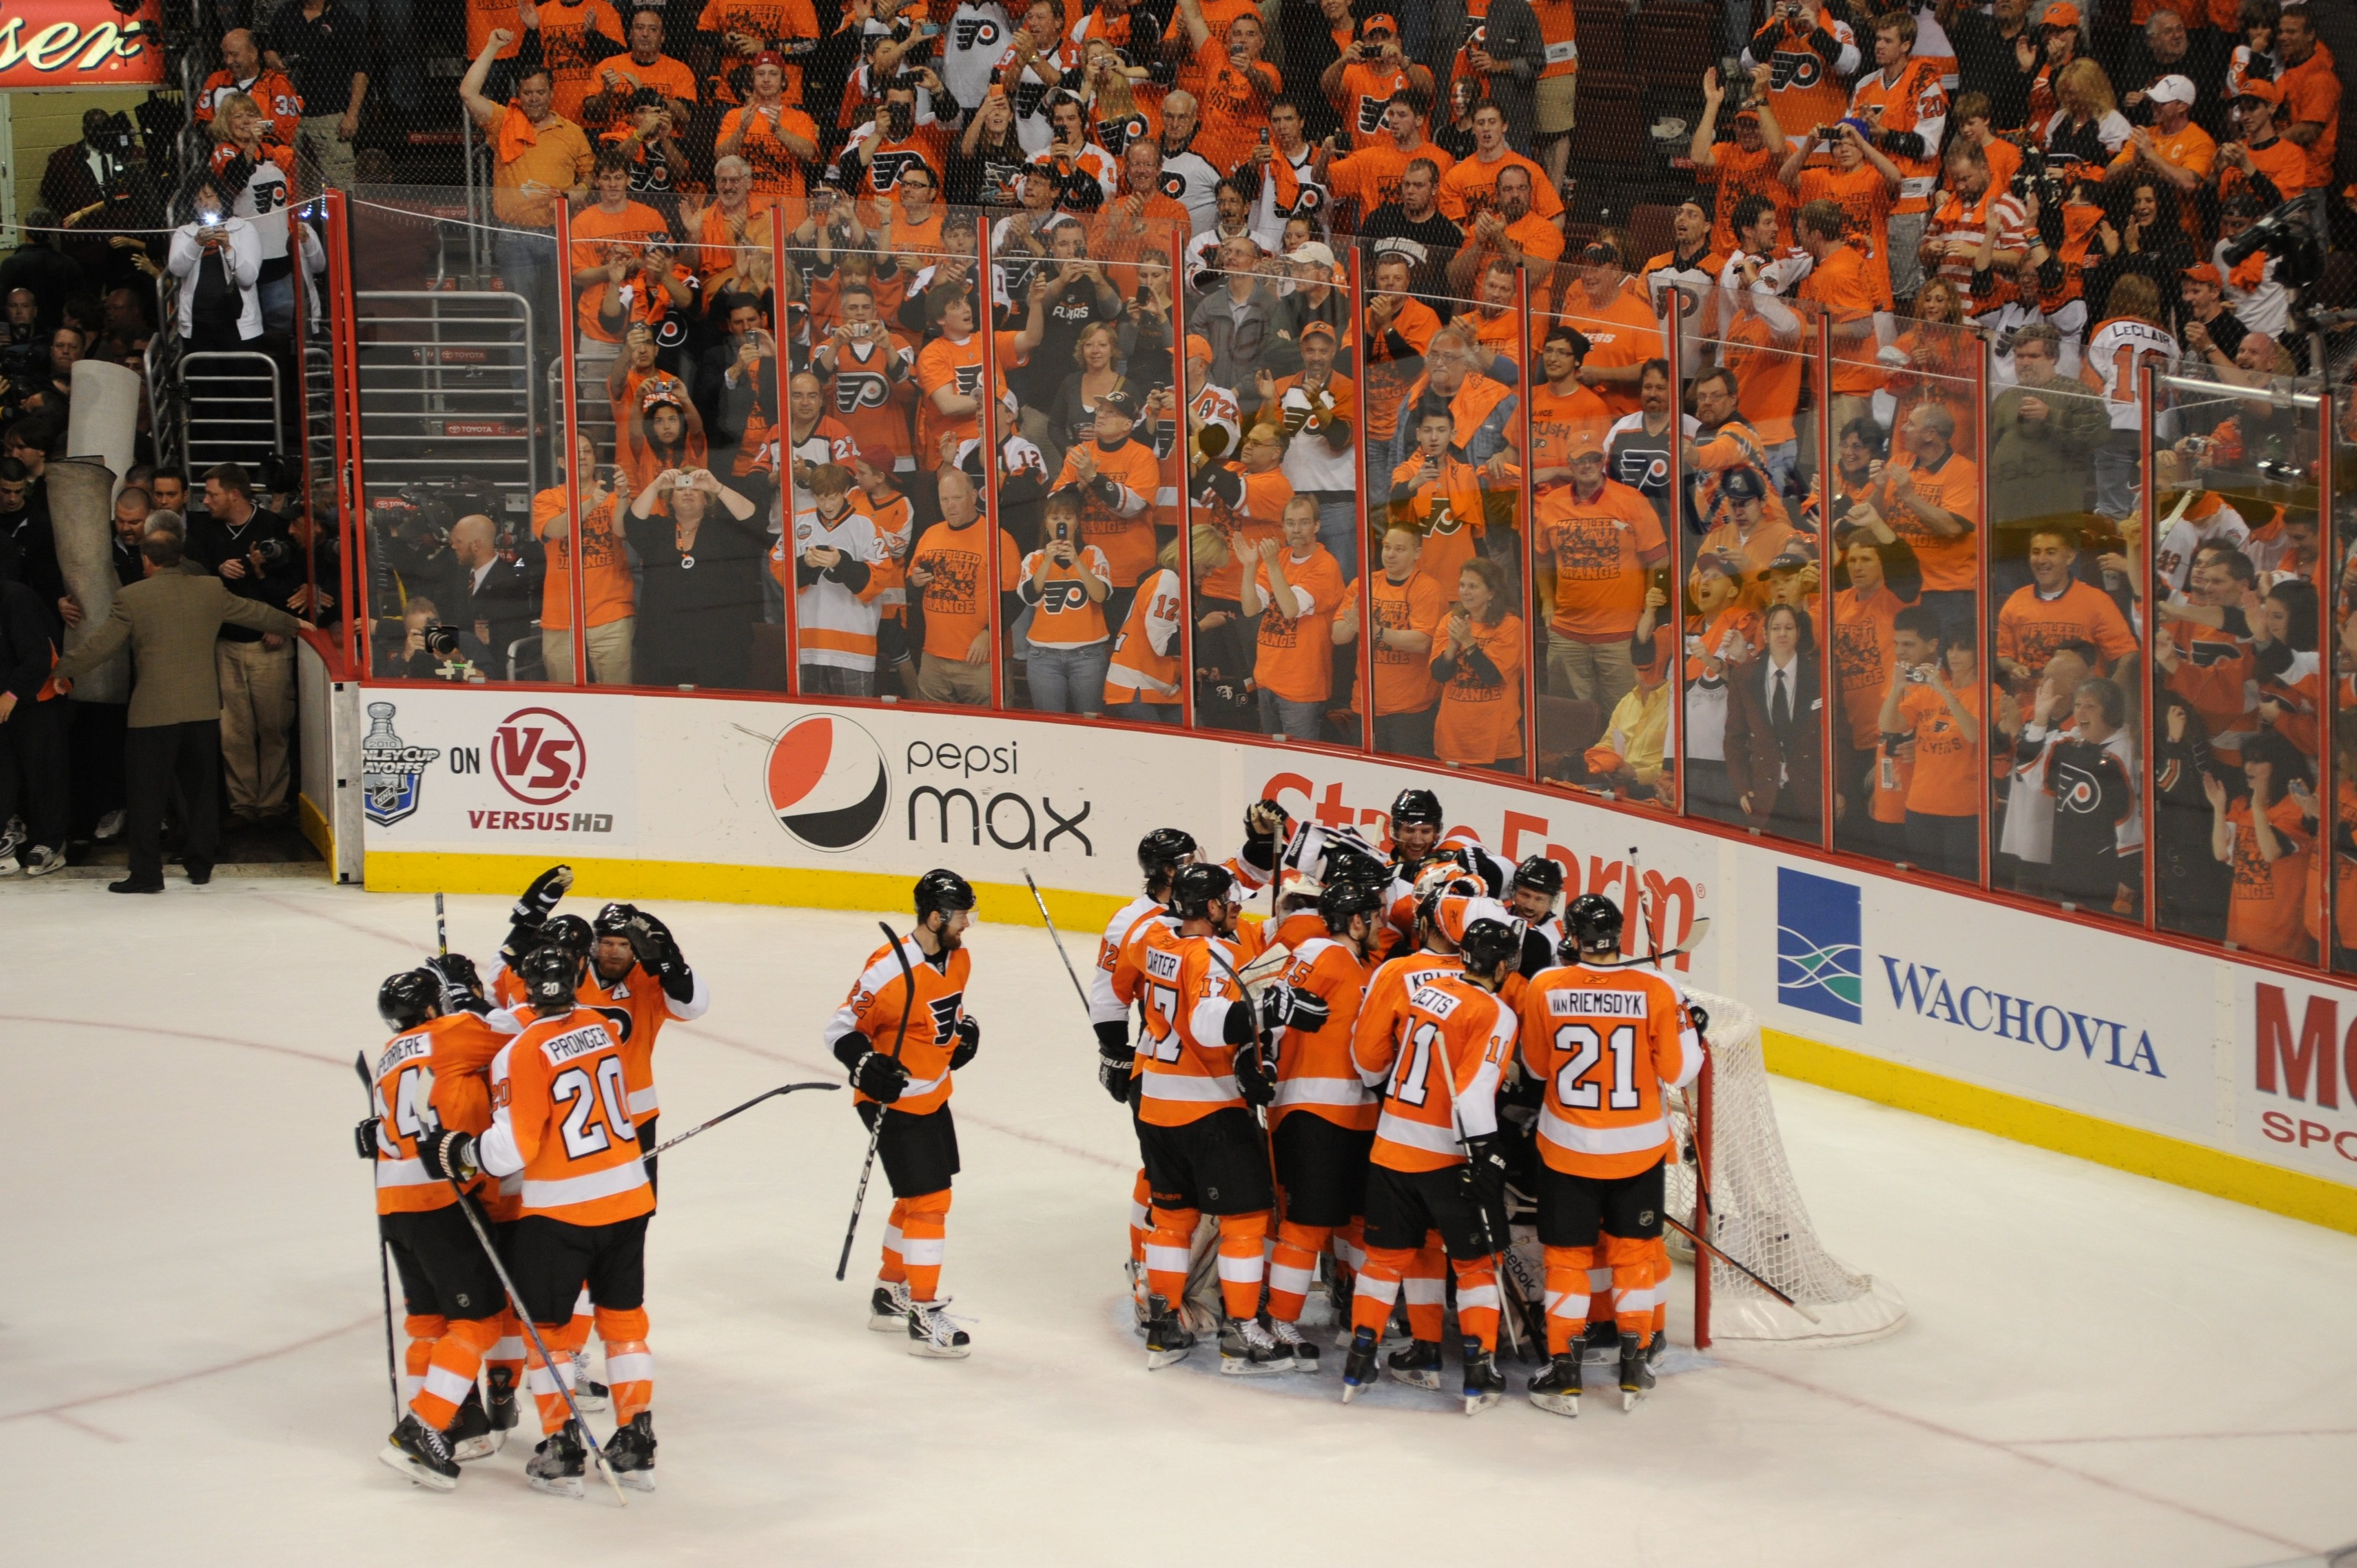 File:Flyers win game 3 in OT in the 2010 Stanley Cup Finals.jpg - Wikipedia